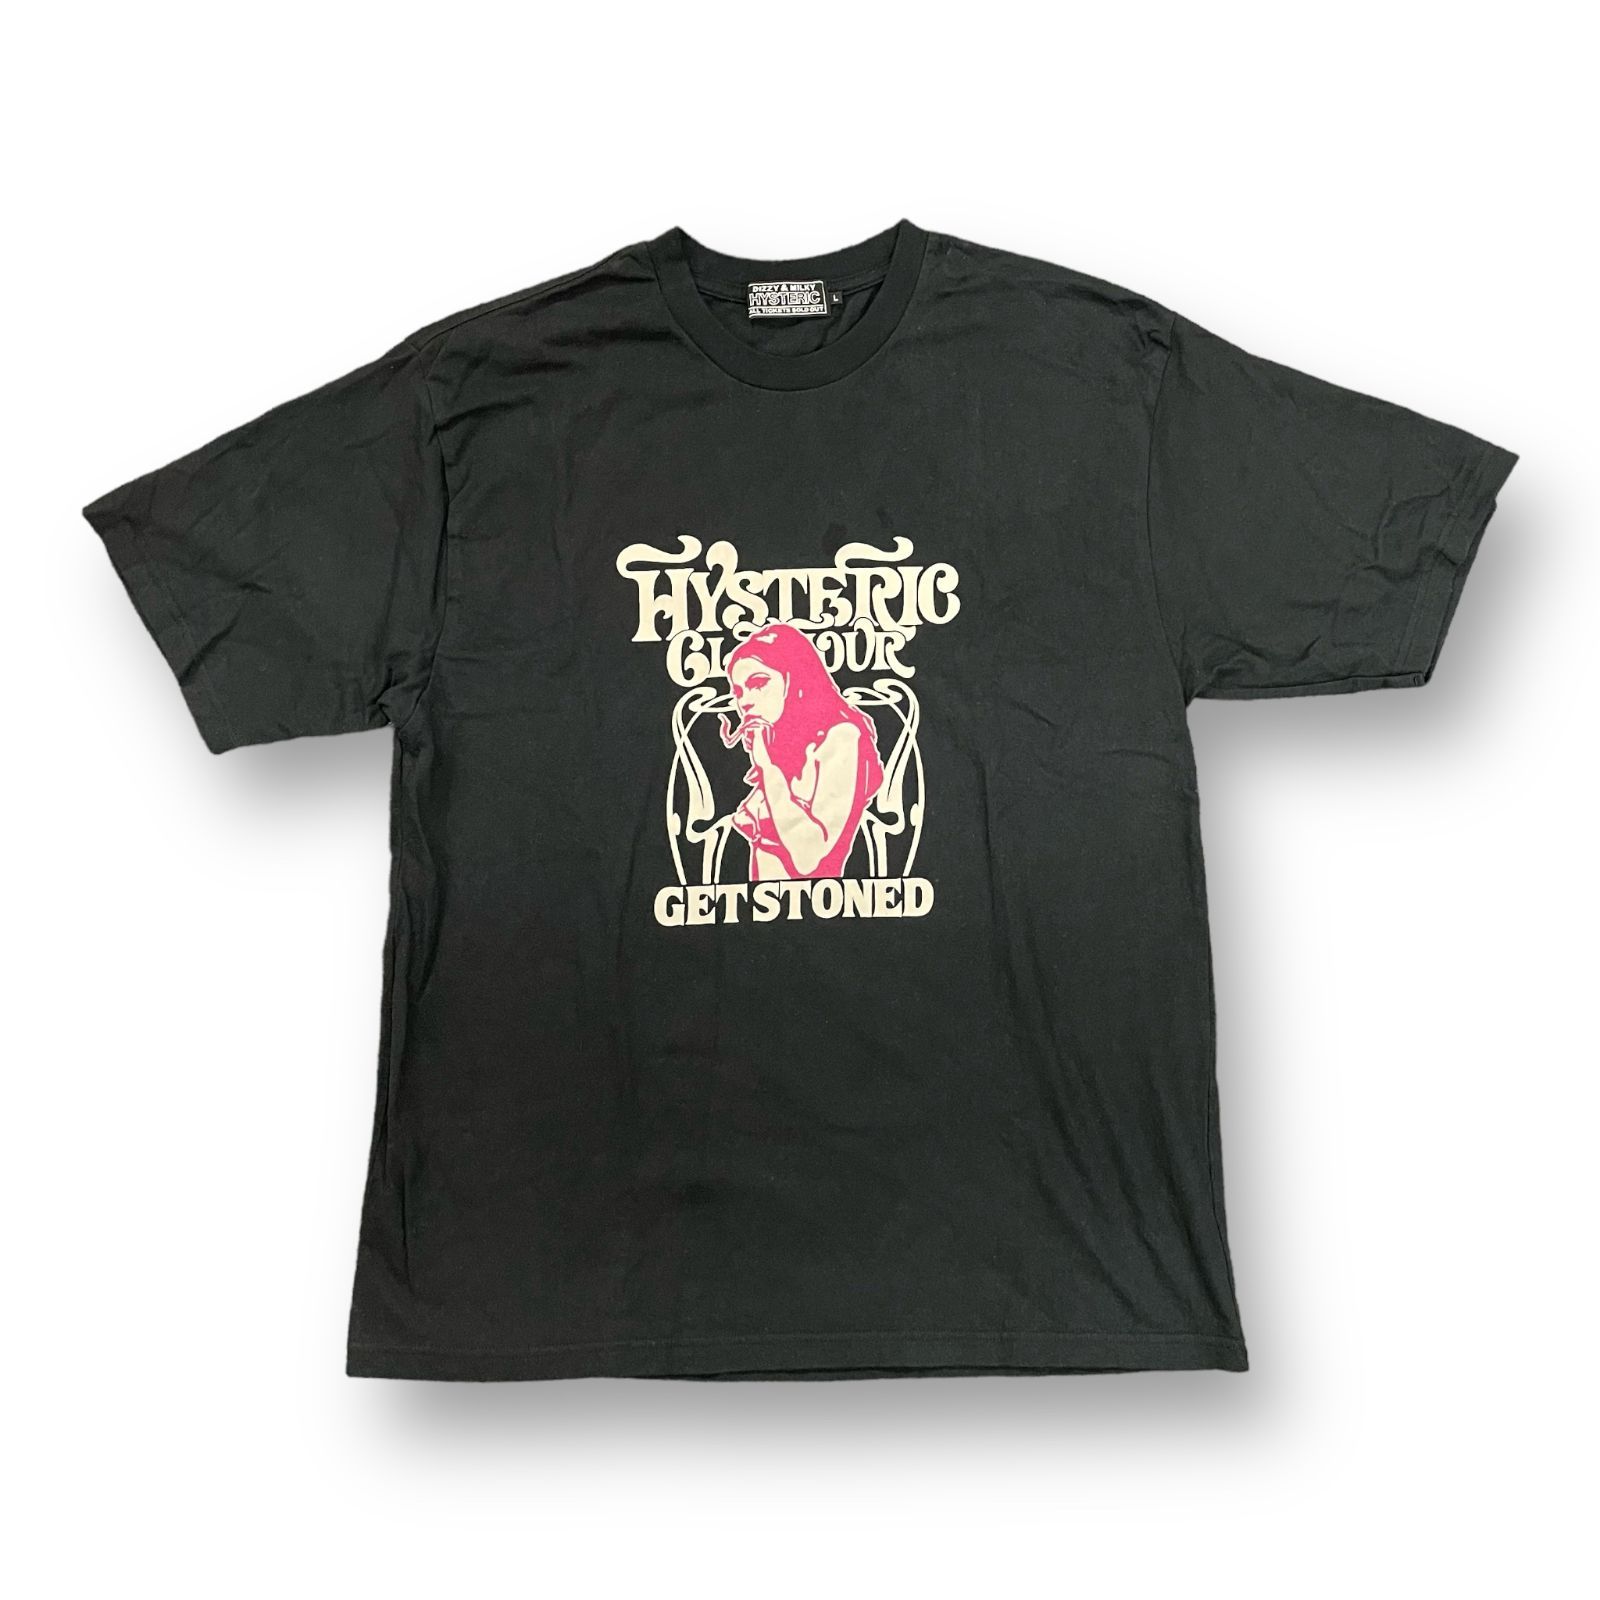 HYSTERIC GLAMOUR 23SS GET STONED Tシャツ ガールプリント Tシャツ 